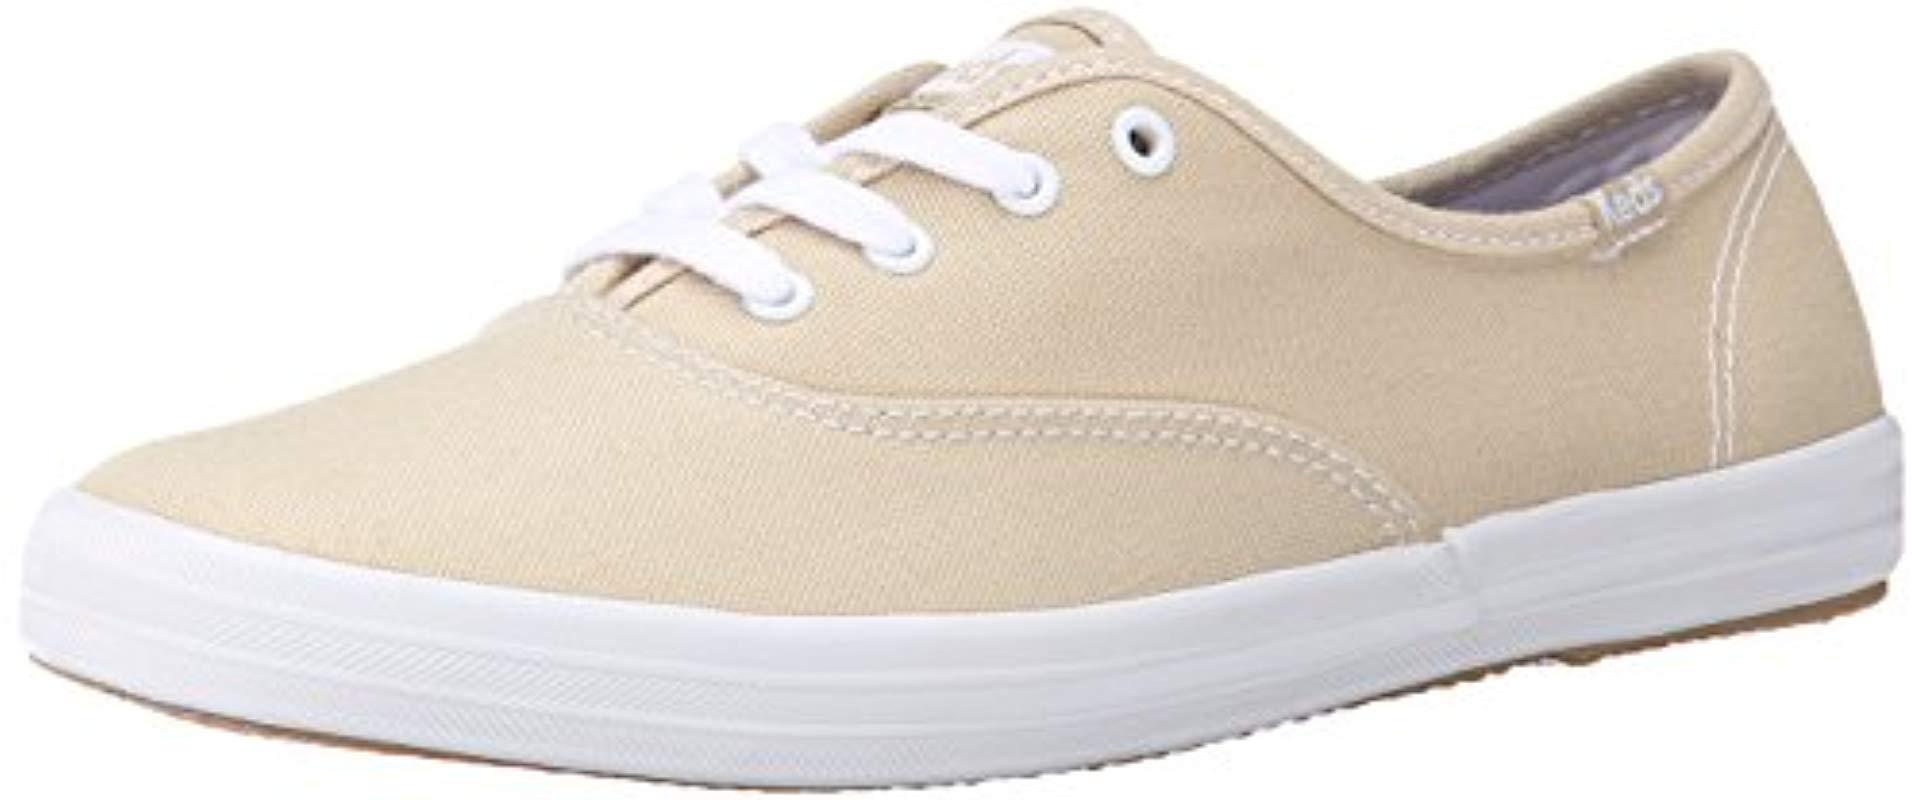 Keds Champion Original Canvas Sneaker in Natural - Lyst